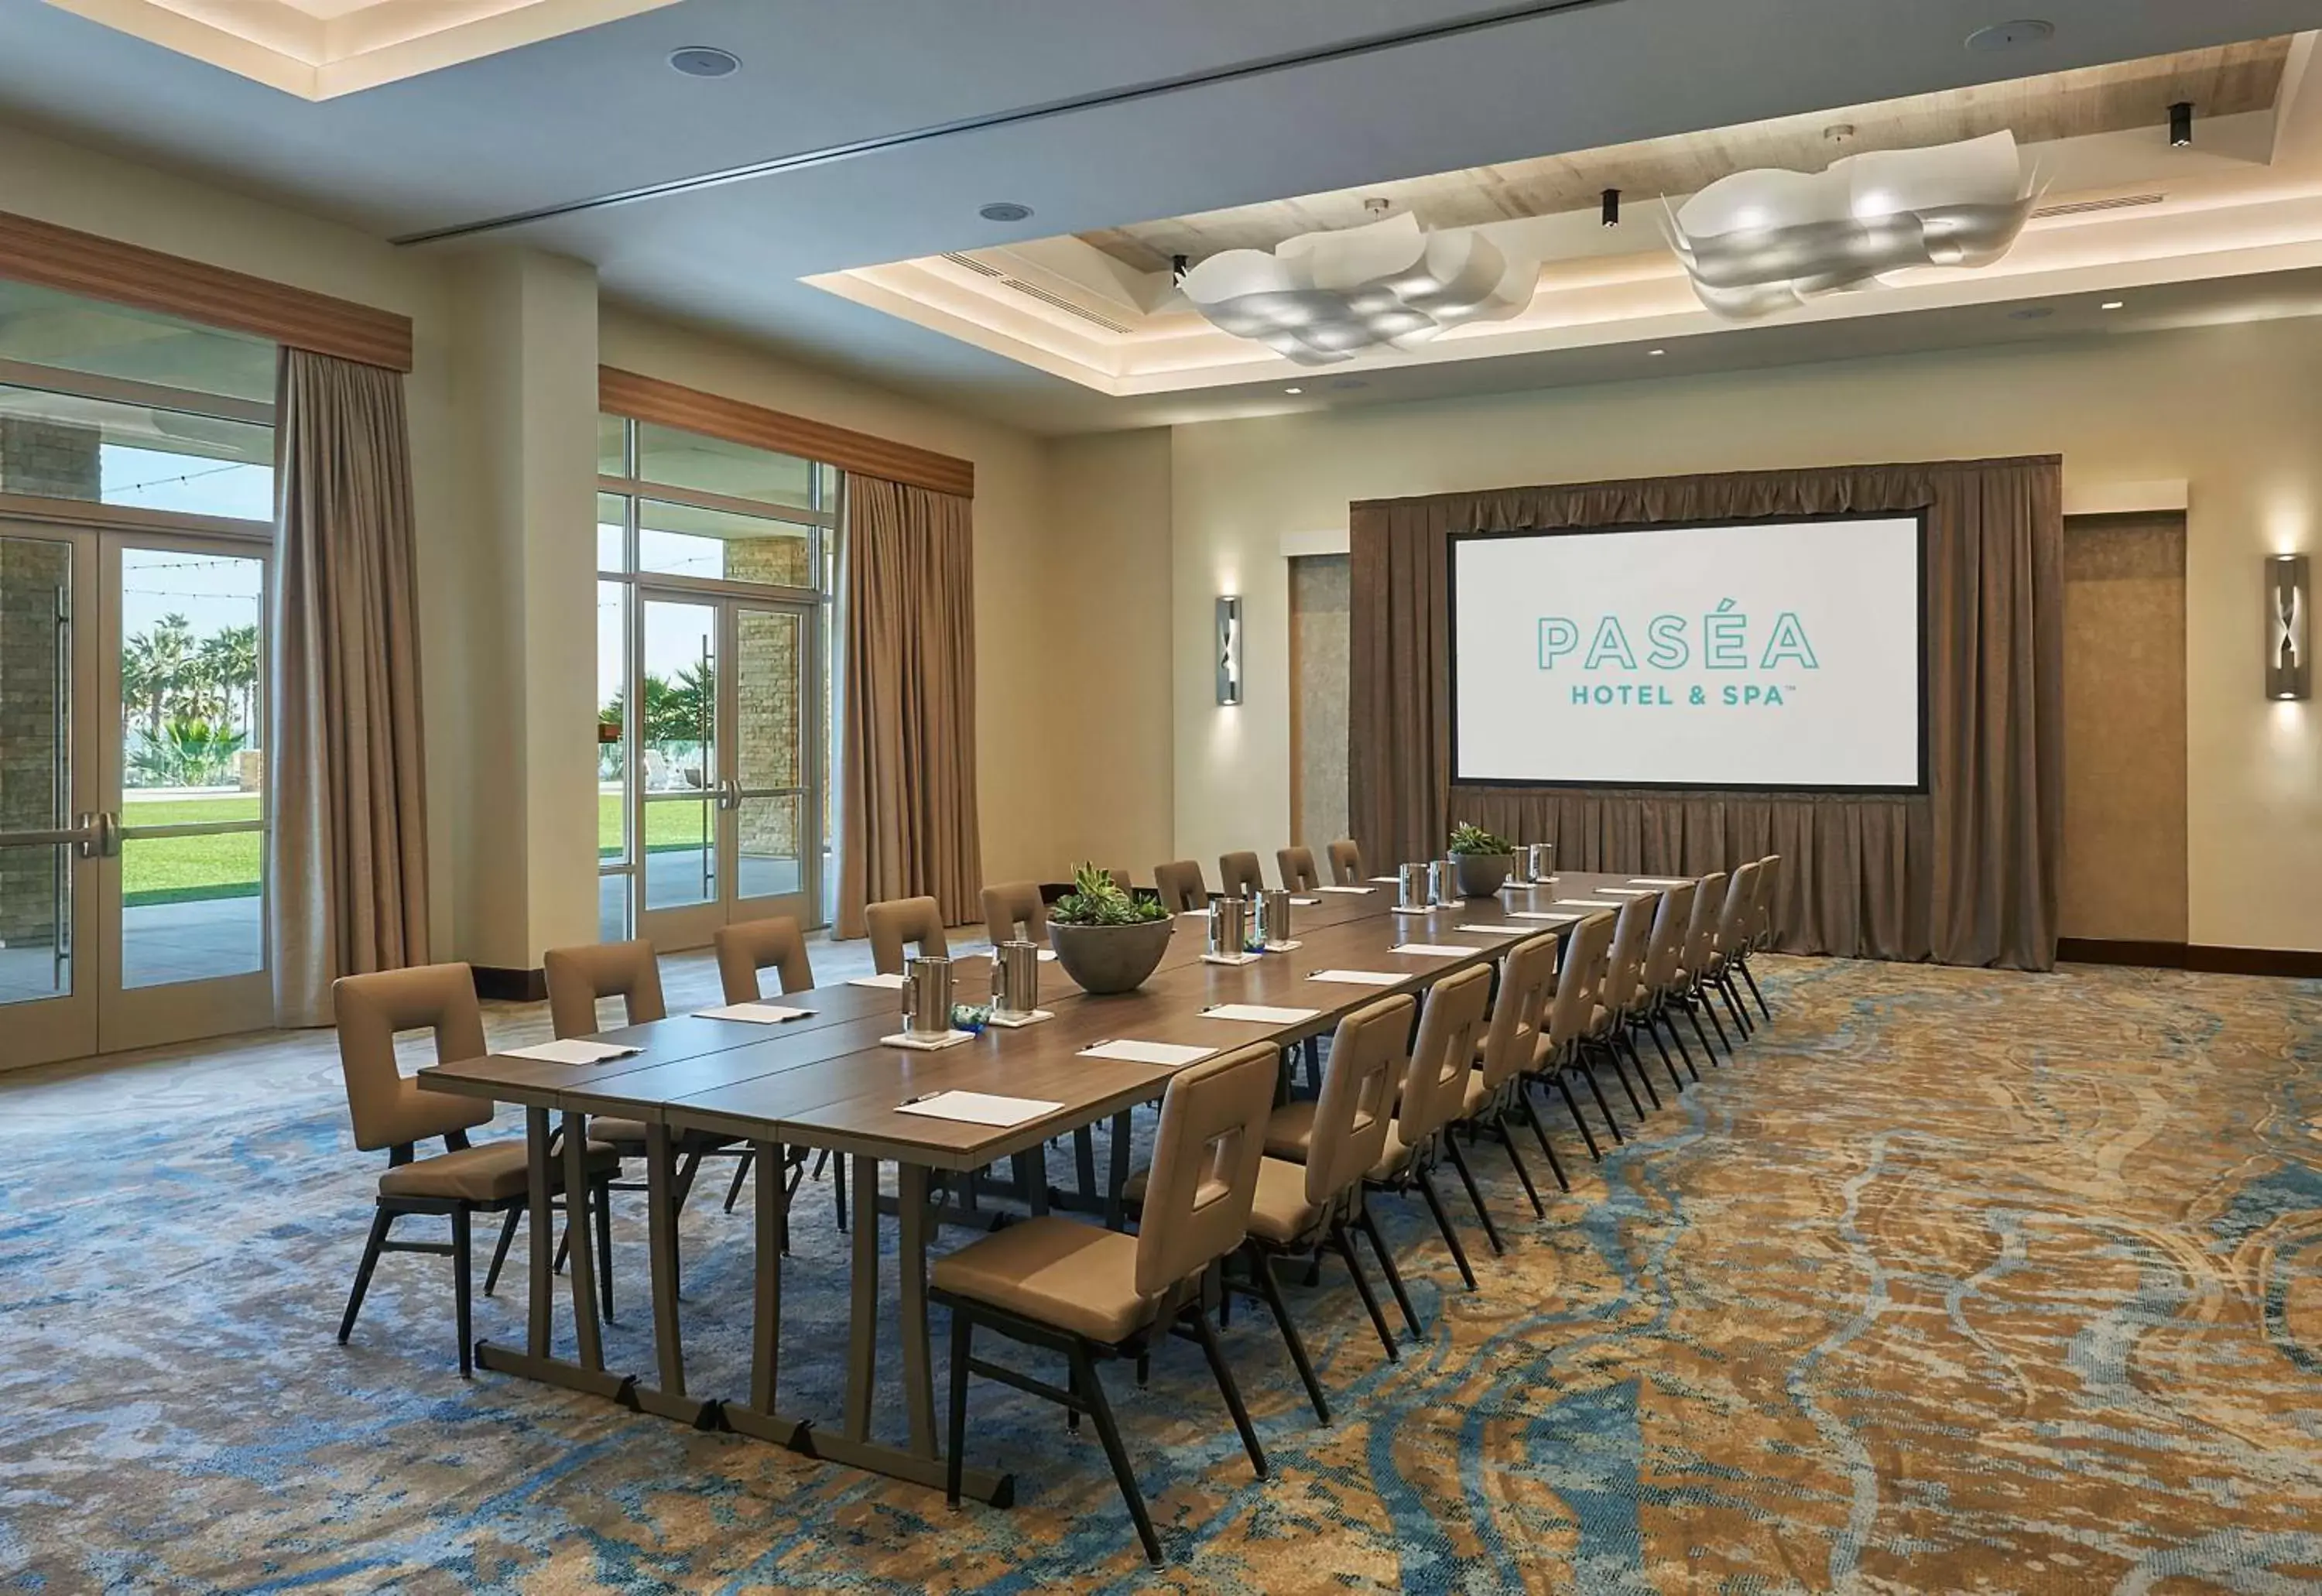 Meeting/conference room in Paséa Hotel & Spa